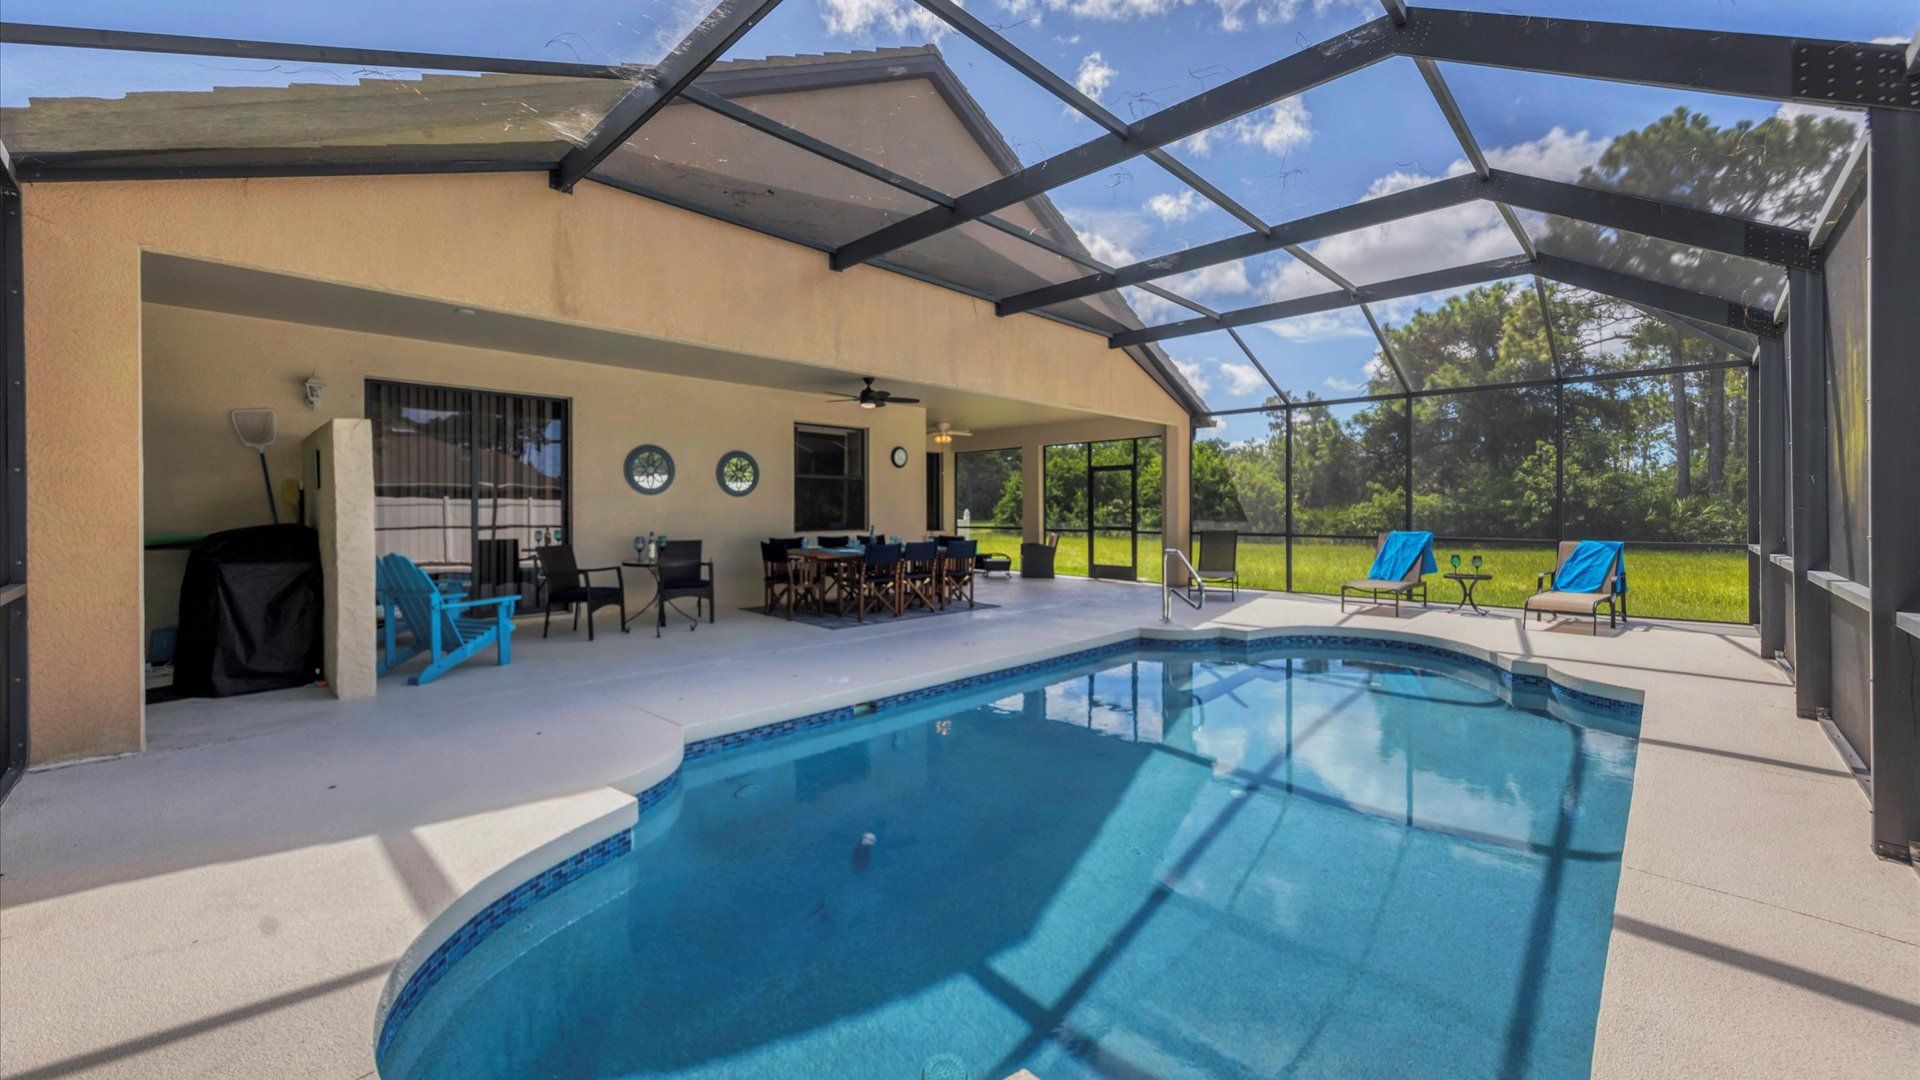 Take full advantage of outdoor life with the gorgeous and spacious outdoor lanai and pool.